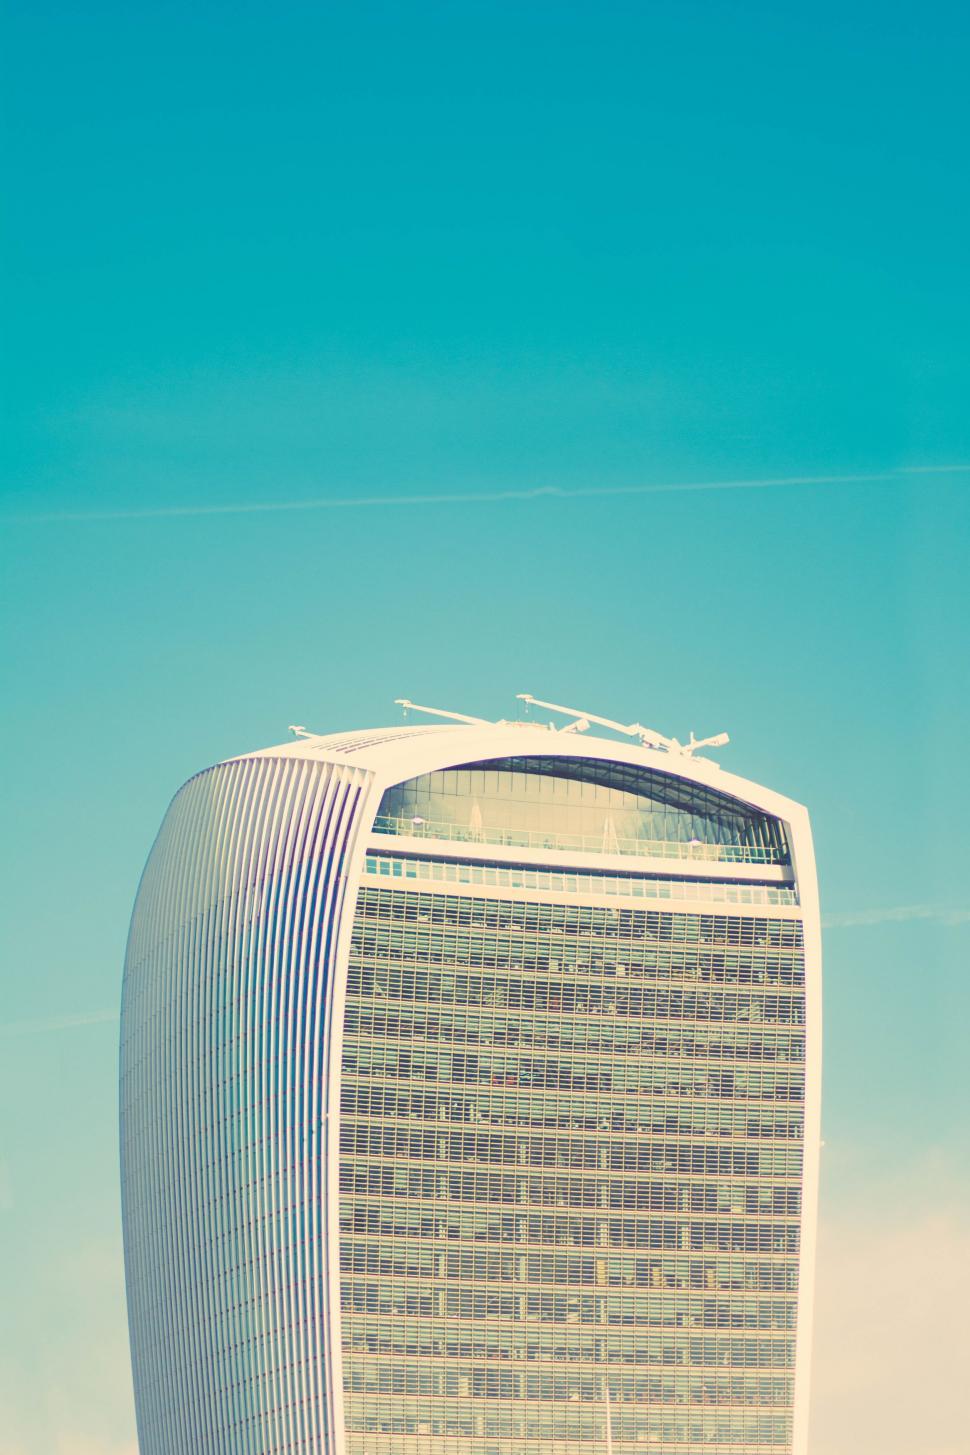 Free Image of Tall Building Against Sky Background 